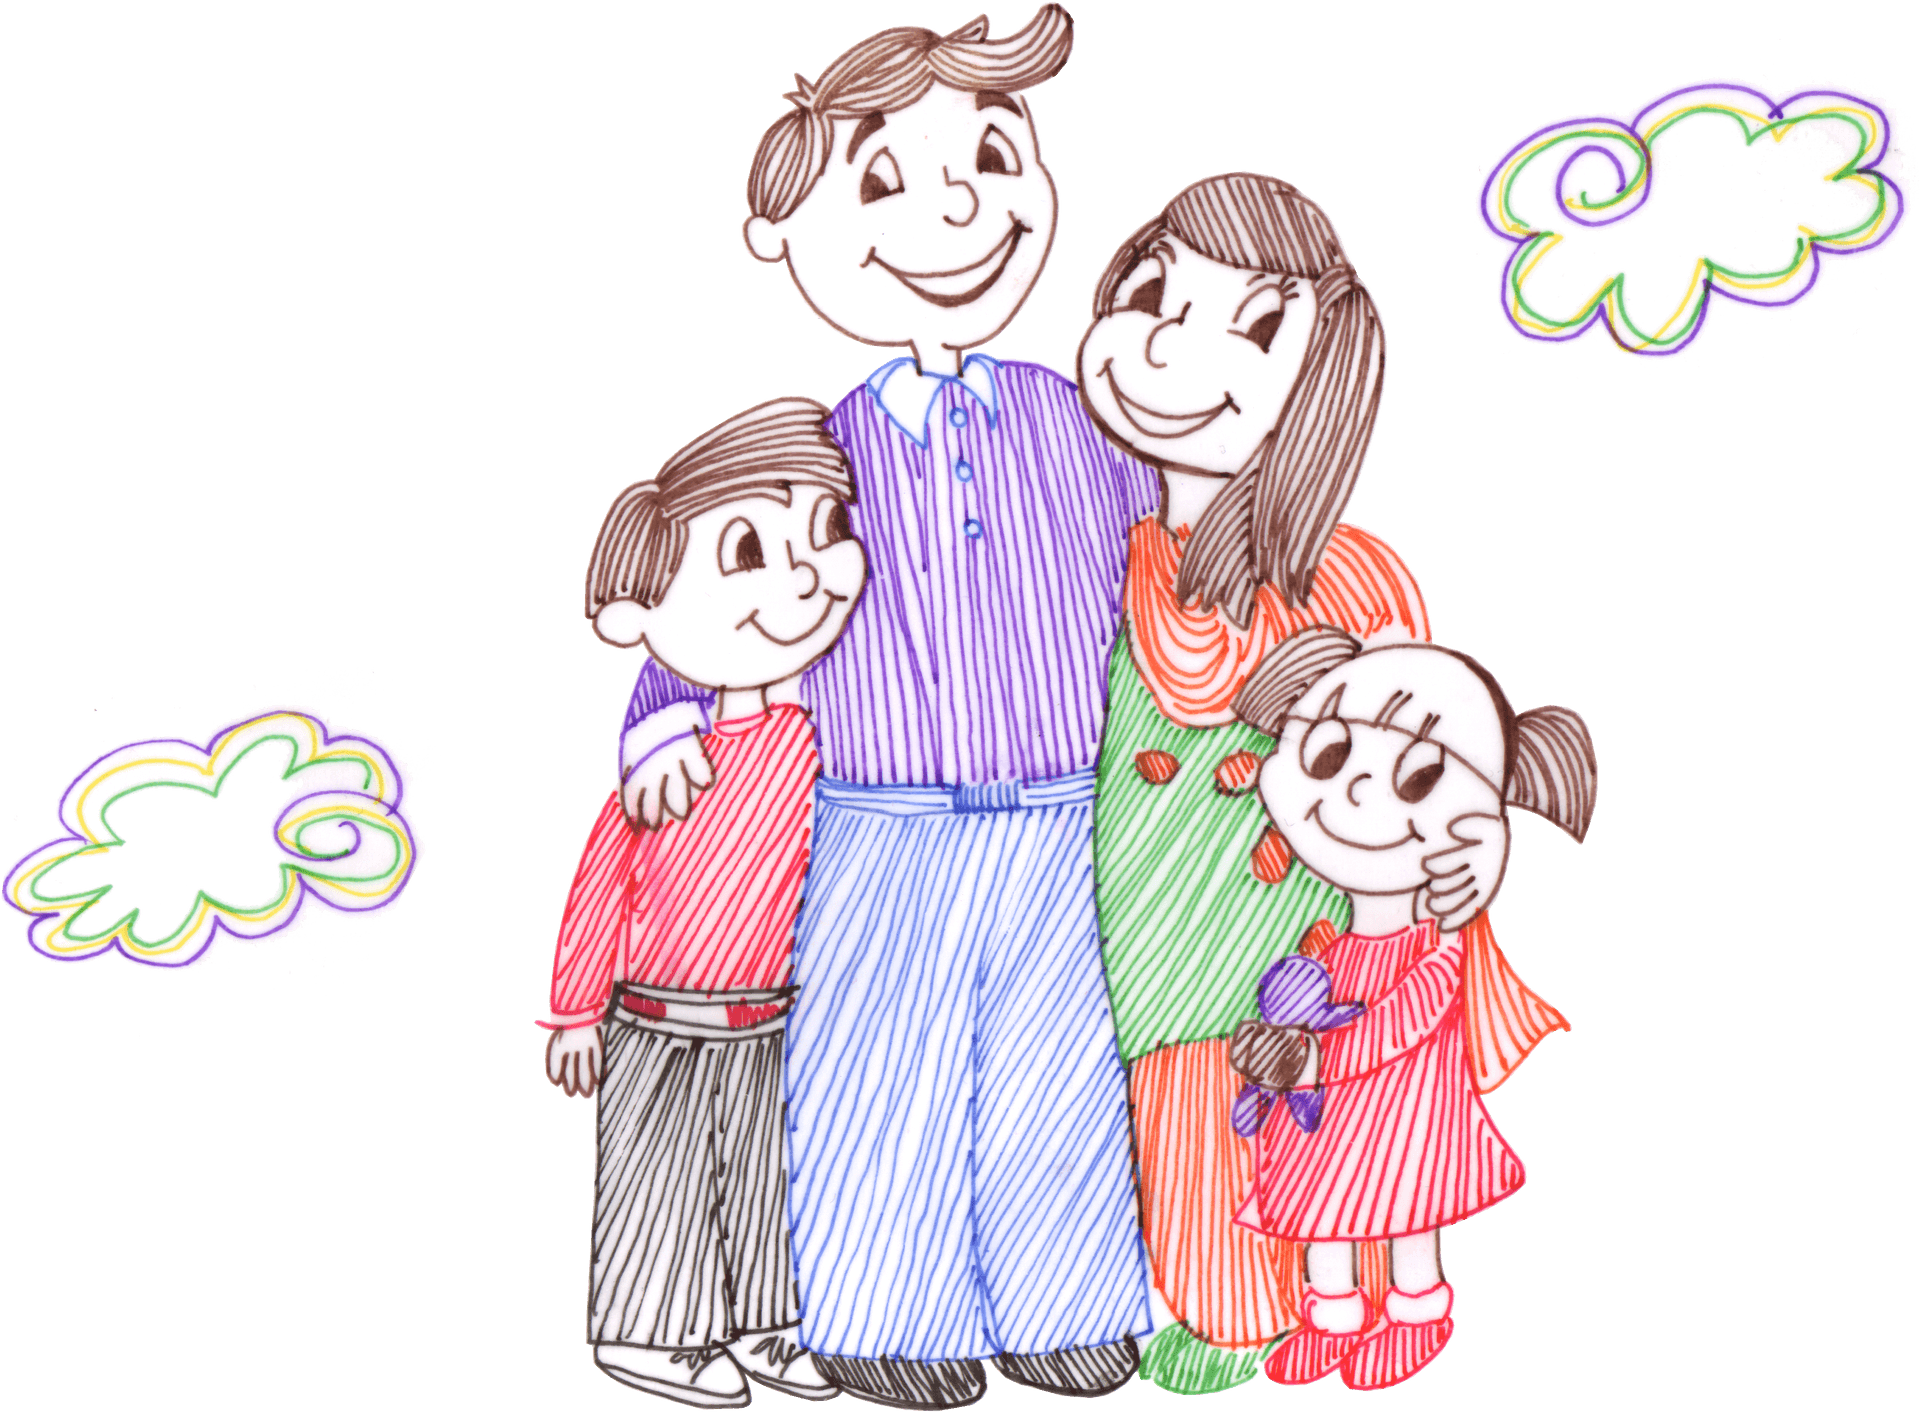 Happy Family Illustration PNG